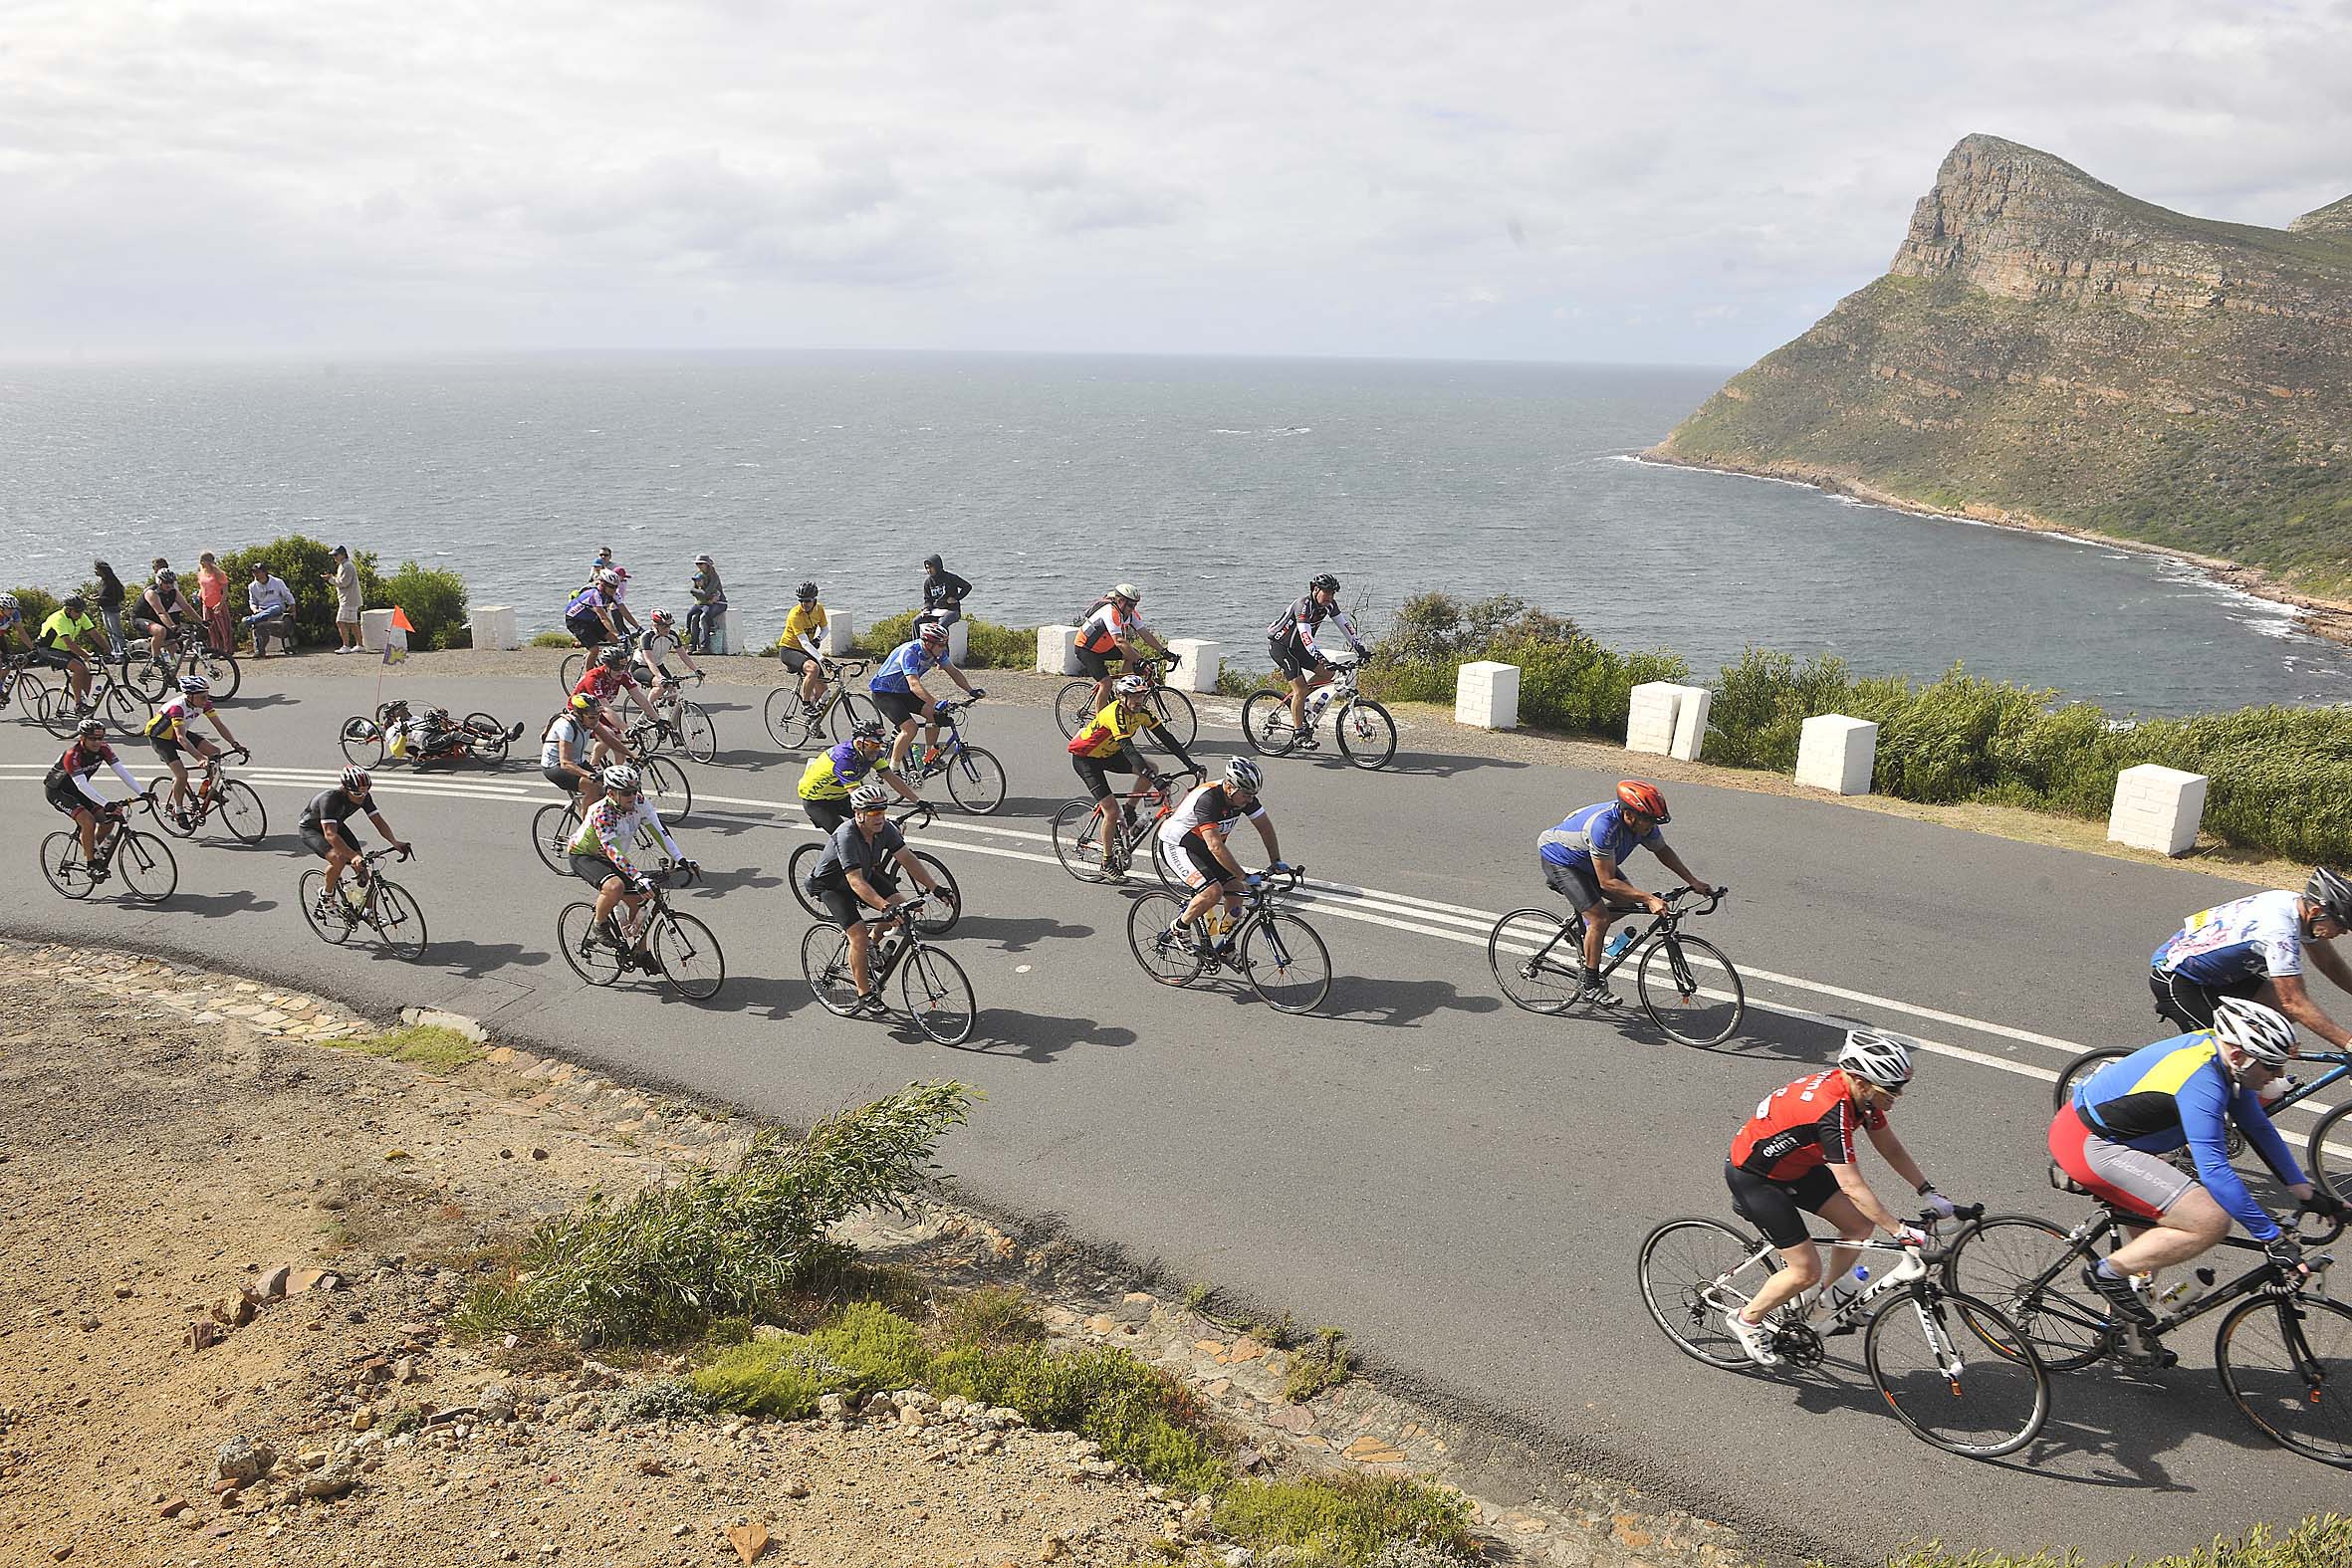 Cycling is allowed on Chapmans Peak Drive.